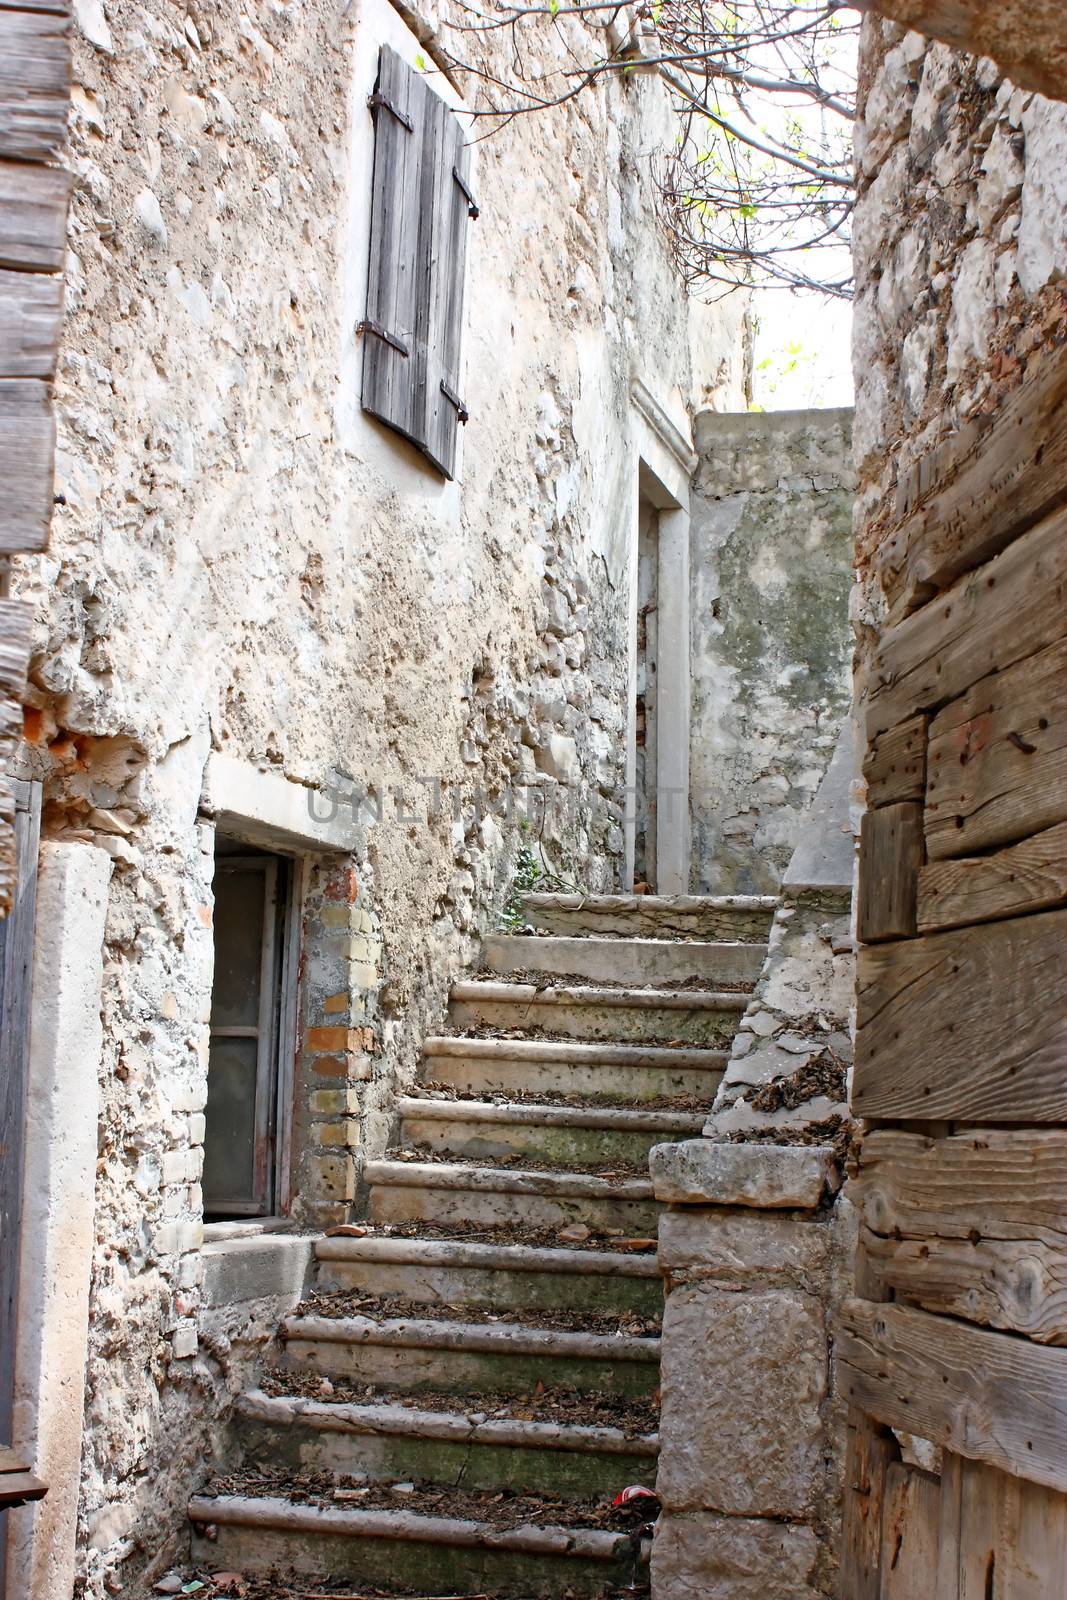 Retro image of old stone stairs and house